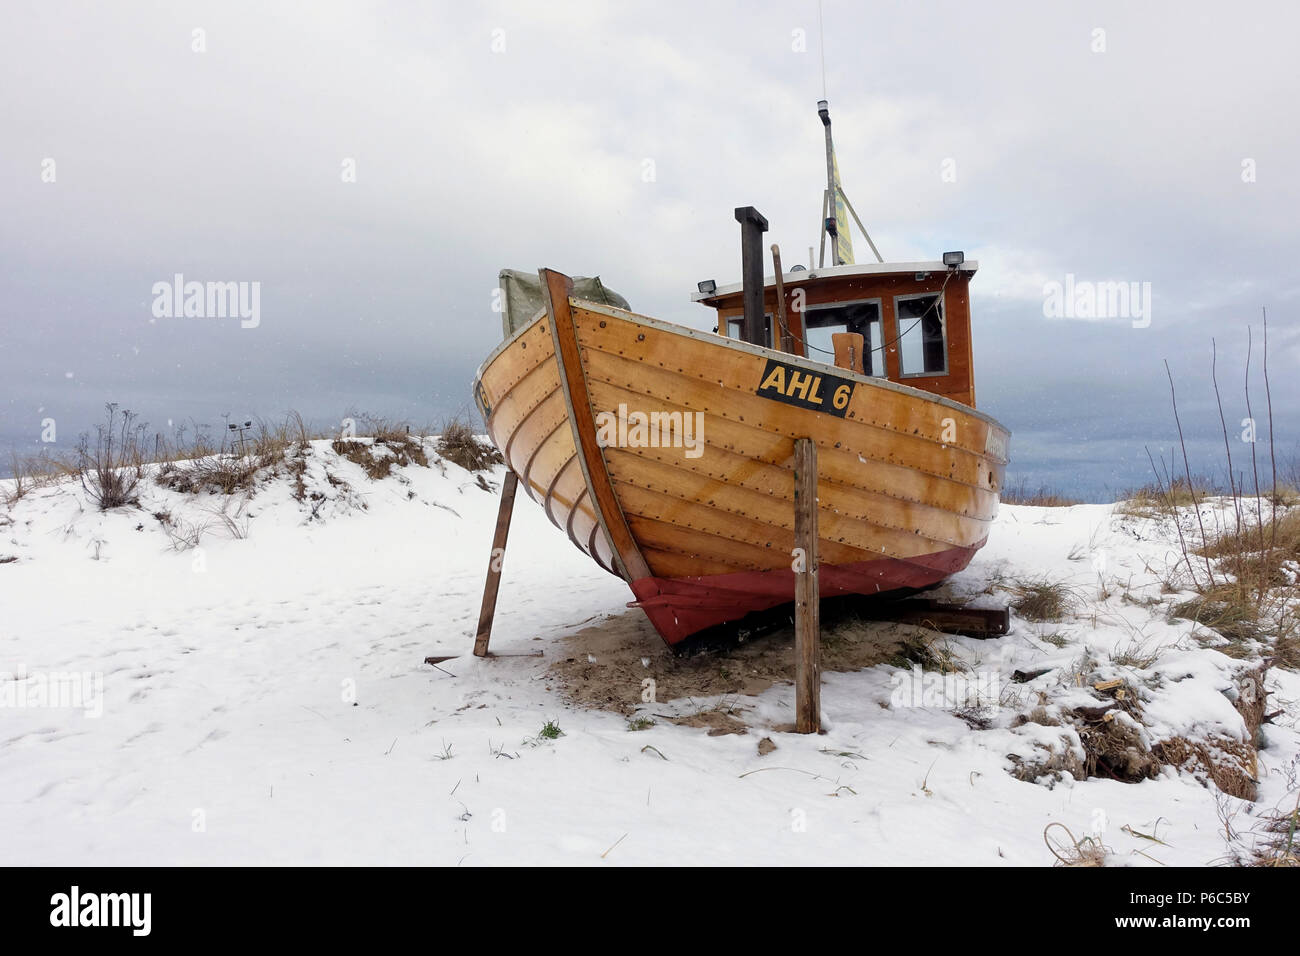 Ahlbeck, Germany, wooden boat is on the beach in winter Stock Photo